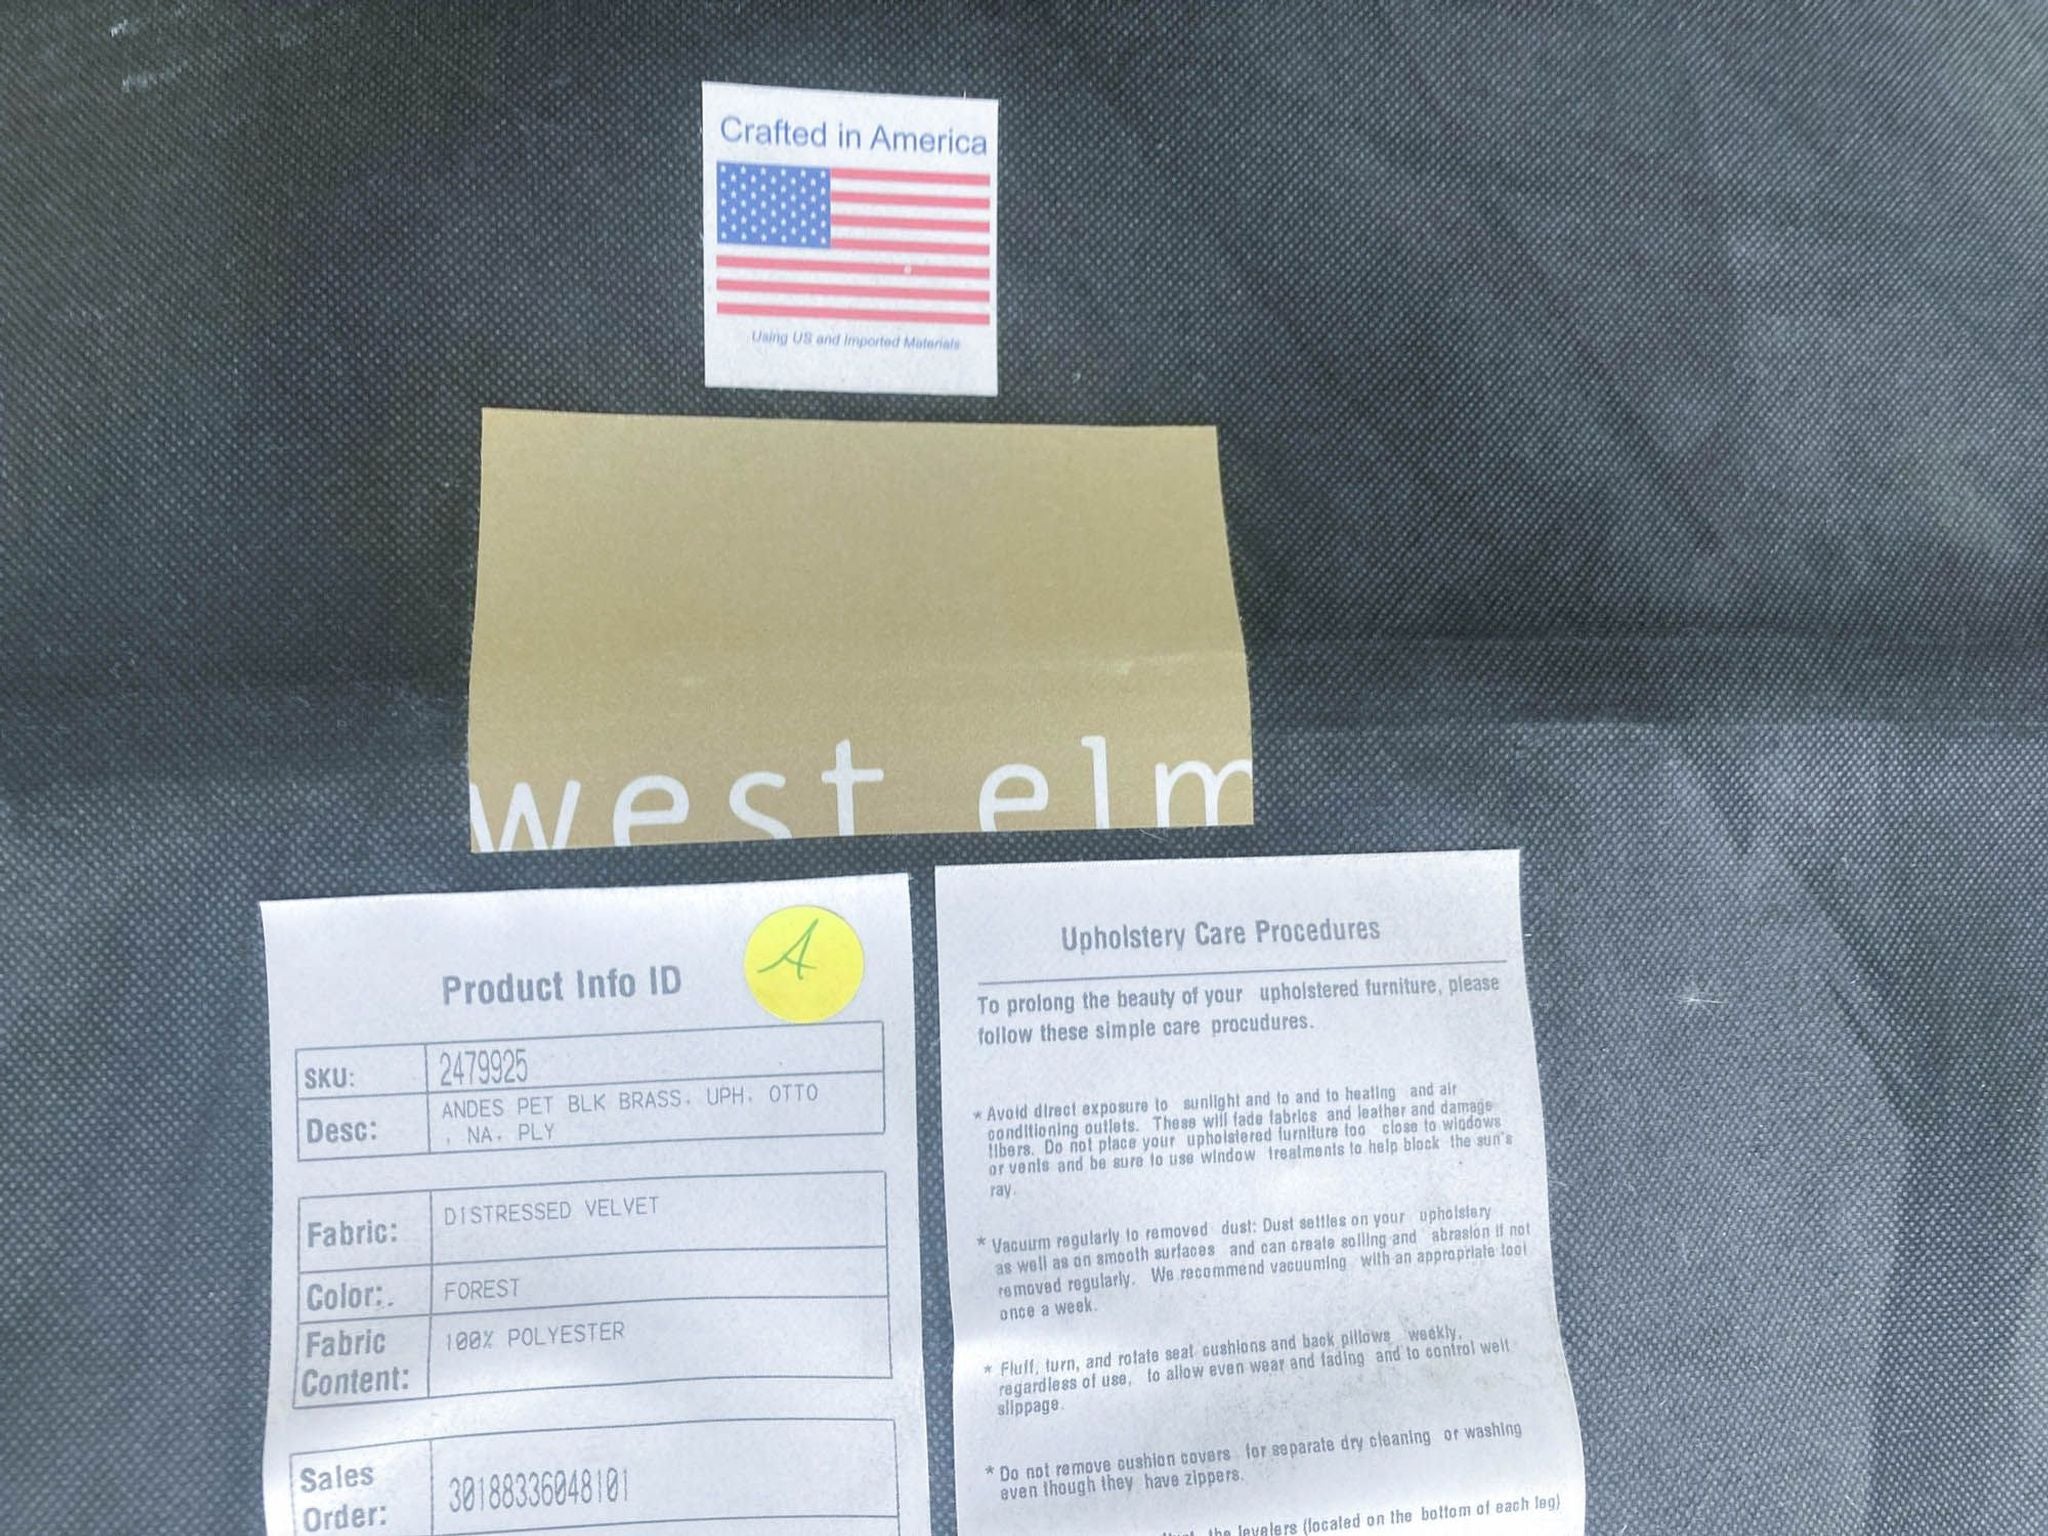 3. "West Elm tag with 'Crafted in America' and a product info card for a velvet ottoman."